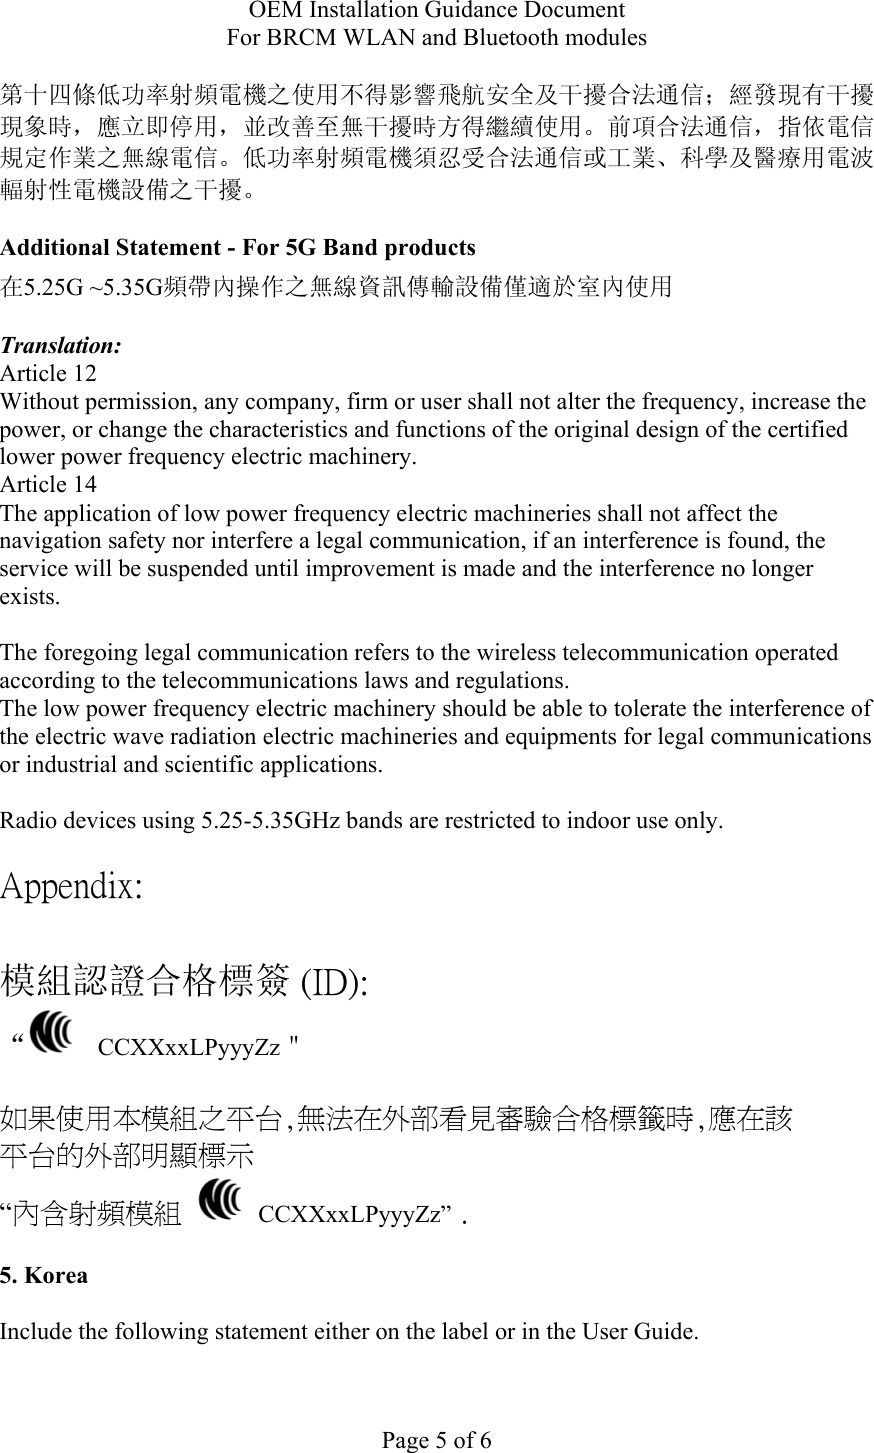 OEM Installation Guidance Document For BRCM WLAN and Bluetooth modules  Page 5 of 6 第十四條低功率射頻電機之使用不得影響飛航安全及干擾合法通信；經發現有干擾現象時，應立即停用，並改善至無干擾時方得繼續使用。前項合法通信，指依電信規定作業之無線電信。低功率射頻電機須忍受合法通信或工業、科學及醫療用電波輻射性電機設備之干擾。  Additional Statement - For 5G Band products 在5.25G ~5.35G頻帶內操作之無線資訊傳輸設備僅適於室內使用  Translation: Article 12 Without permission, any company, firm or user shall not alter the frequency, increase the power, or change the characteristics and functions of the original design of the certified lower power frequency electric machinery. Article 14 The application of low power frequency electric machineries shall not affect the navigation safety nor interfere a legal communication, if an interference is found, the service will be suspended until improvement is made and the interference no longer exists.  The foregoing legal communication refers to the wireless telecommunication operated according to the telecommunications laws and regulations. The low power frequency electric machinery should be able to tolerate the interference of the electric wave radiation electric machineries and equipments for legal communications or industrial and scientific applications.  Radio devices using 5.25-5.35GHz bands are restricted to indoor use only.  Appendix:  模組認證合格標簽 (ID): “   CCXXxxLPyyyZz＂  如果使用本模組之平台,無法在外部看見審驗合格標籤時,應在該 平台的外部明顯標示 “內含射頻模組   CCXXxxLPyyyZz” .  5. Korea  Include the following statement either on the label or in the User Guide.   